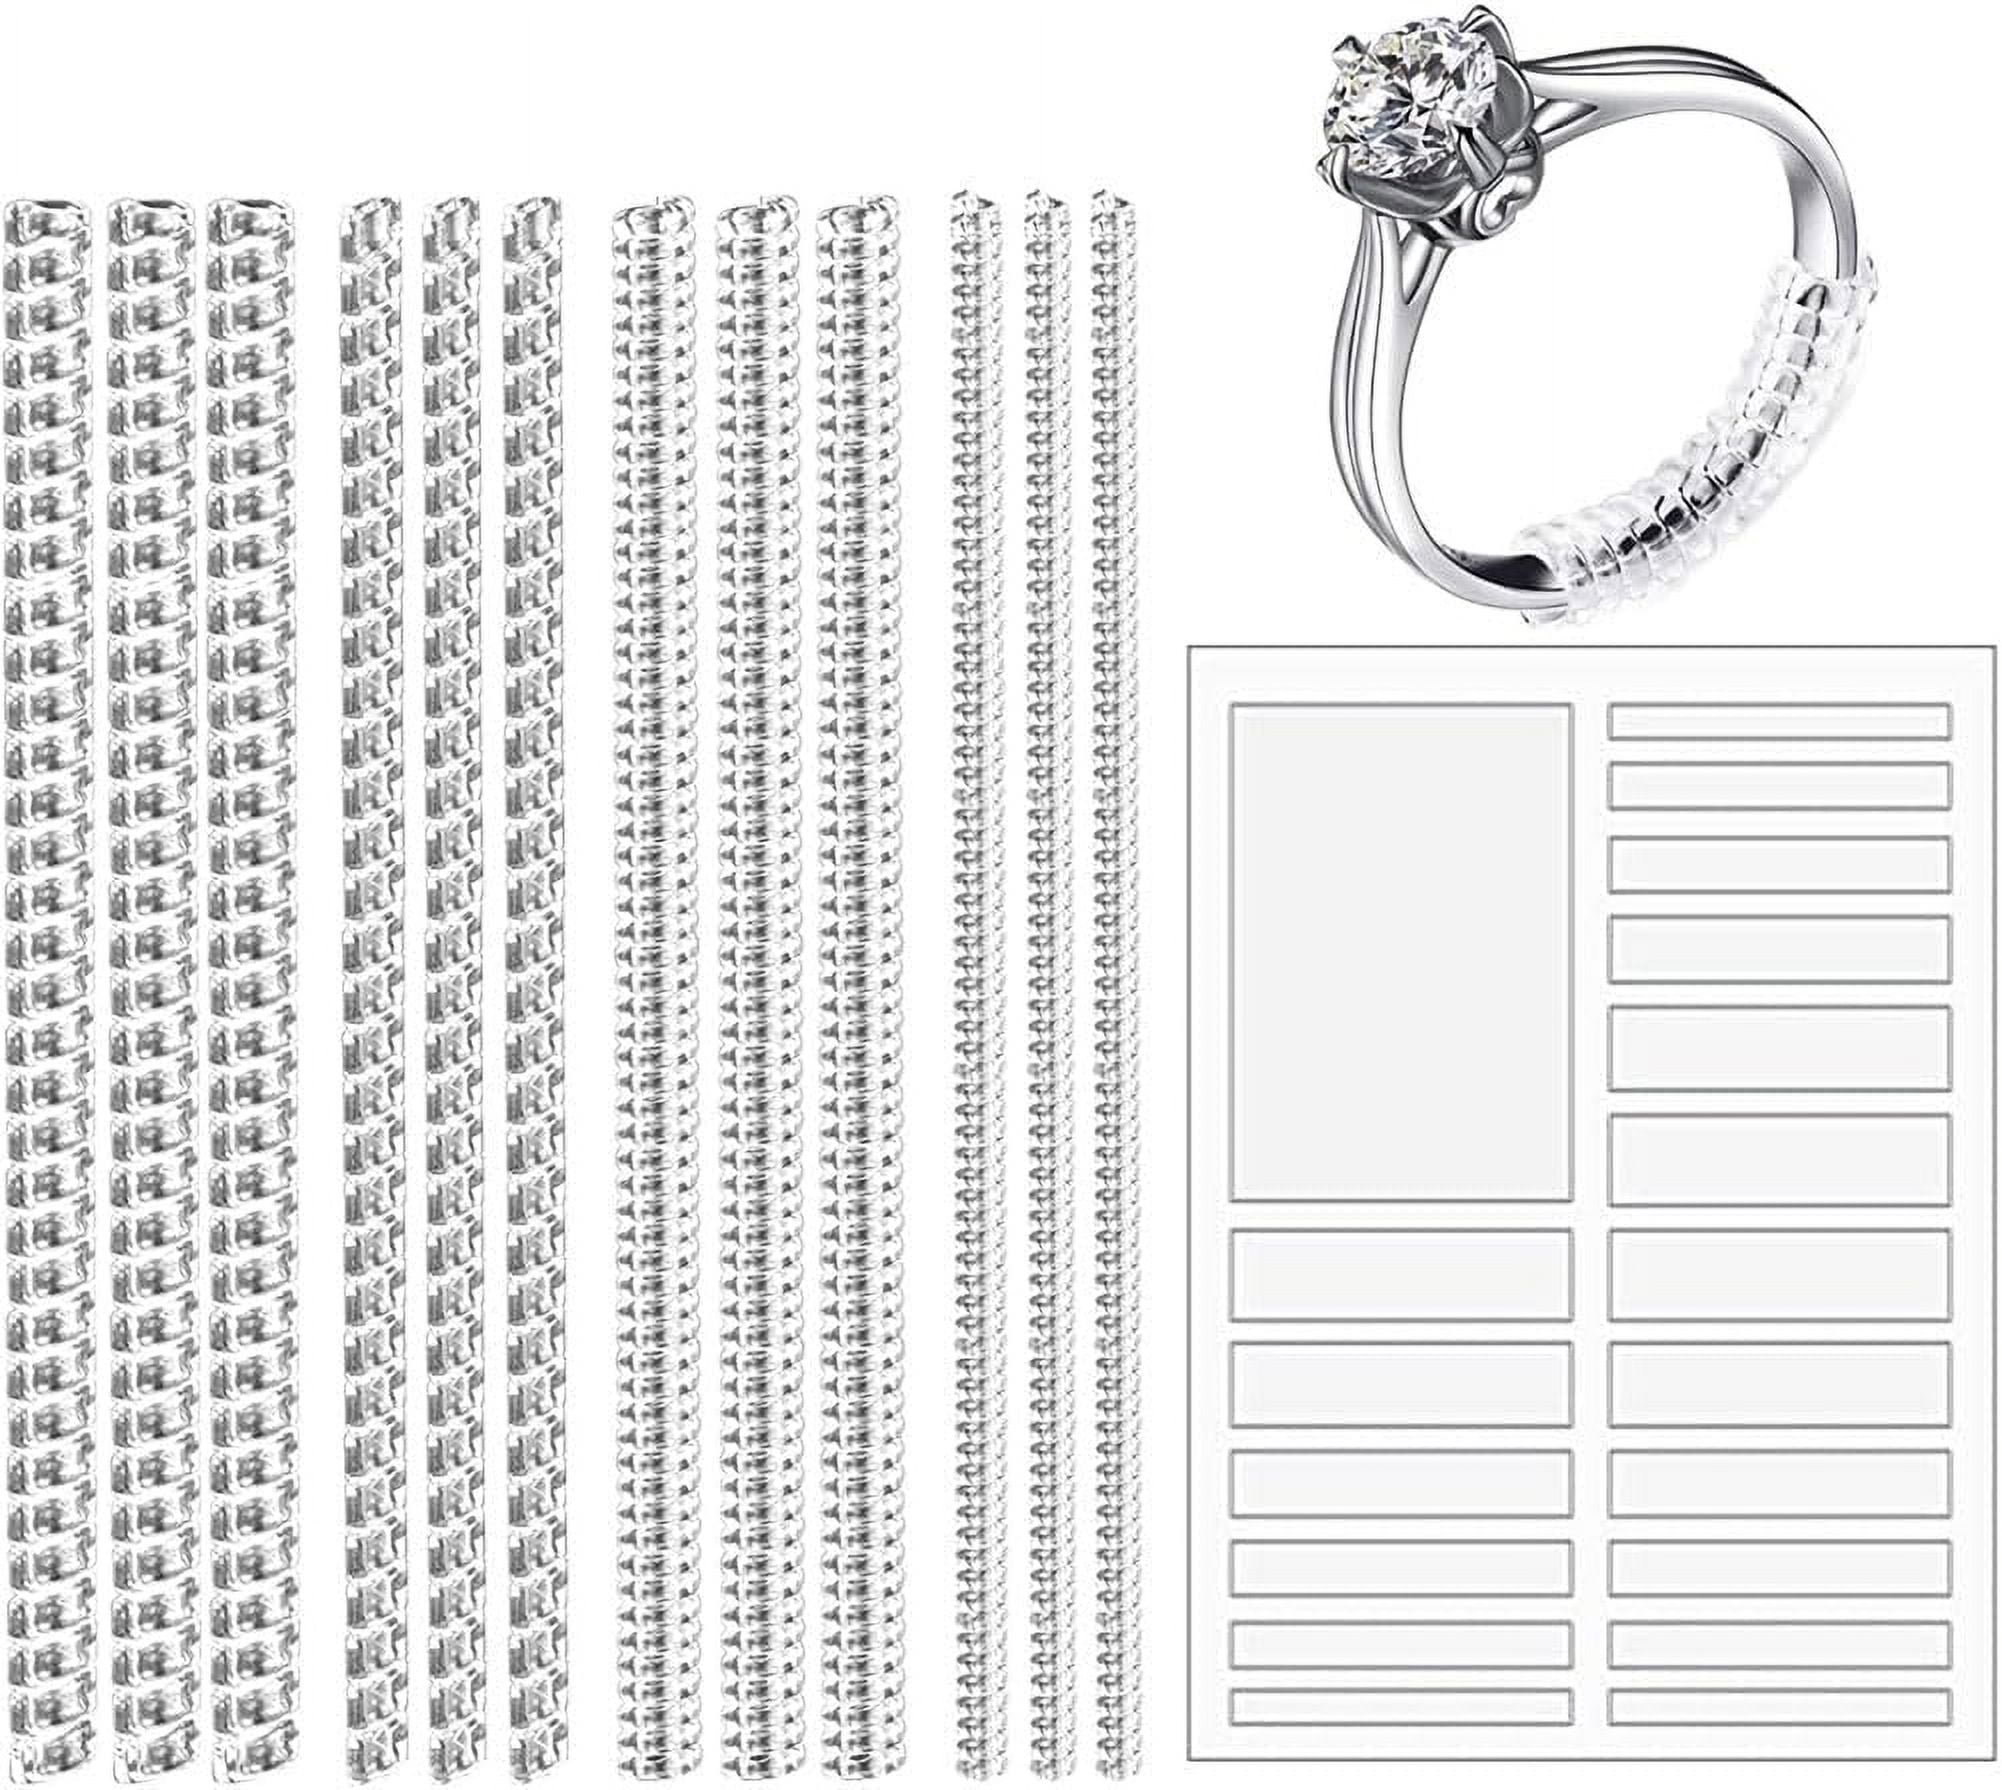 Ontaryon Assorted Ring Size Adjuster for Loose Rings  